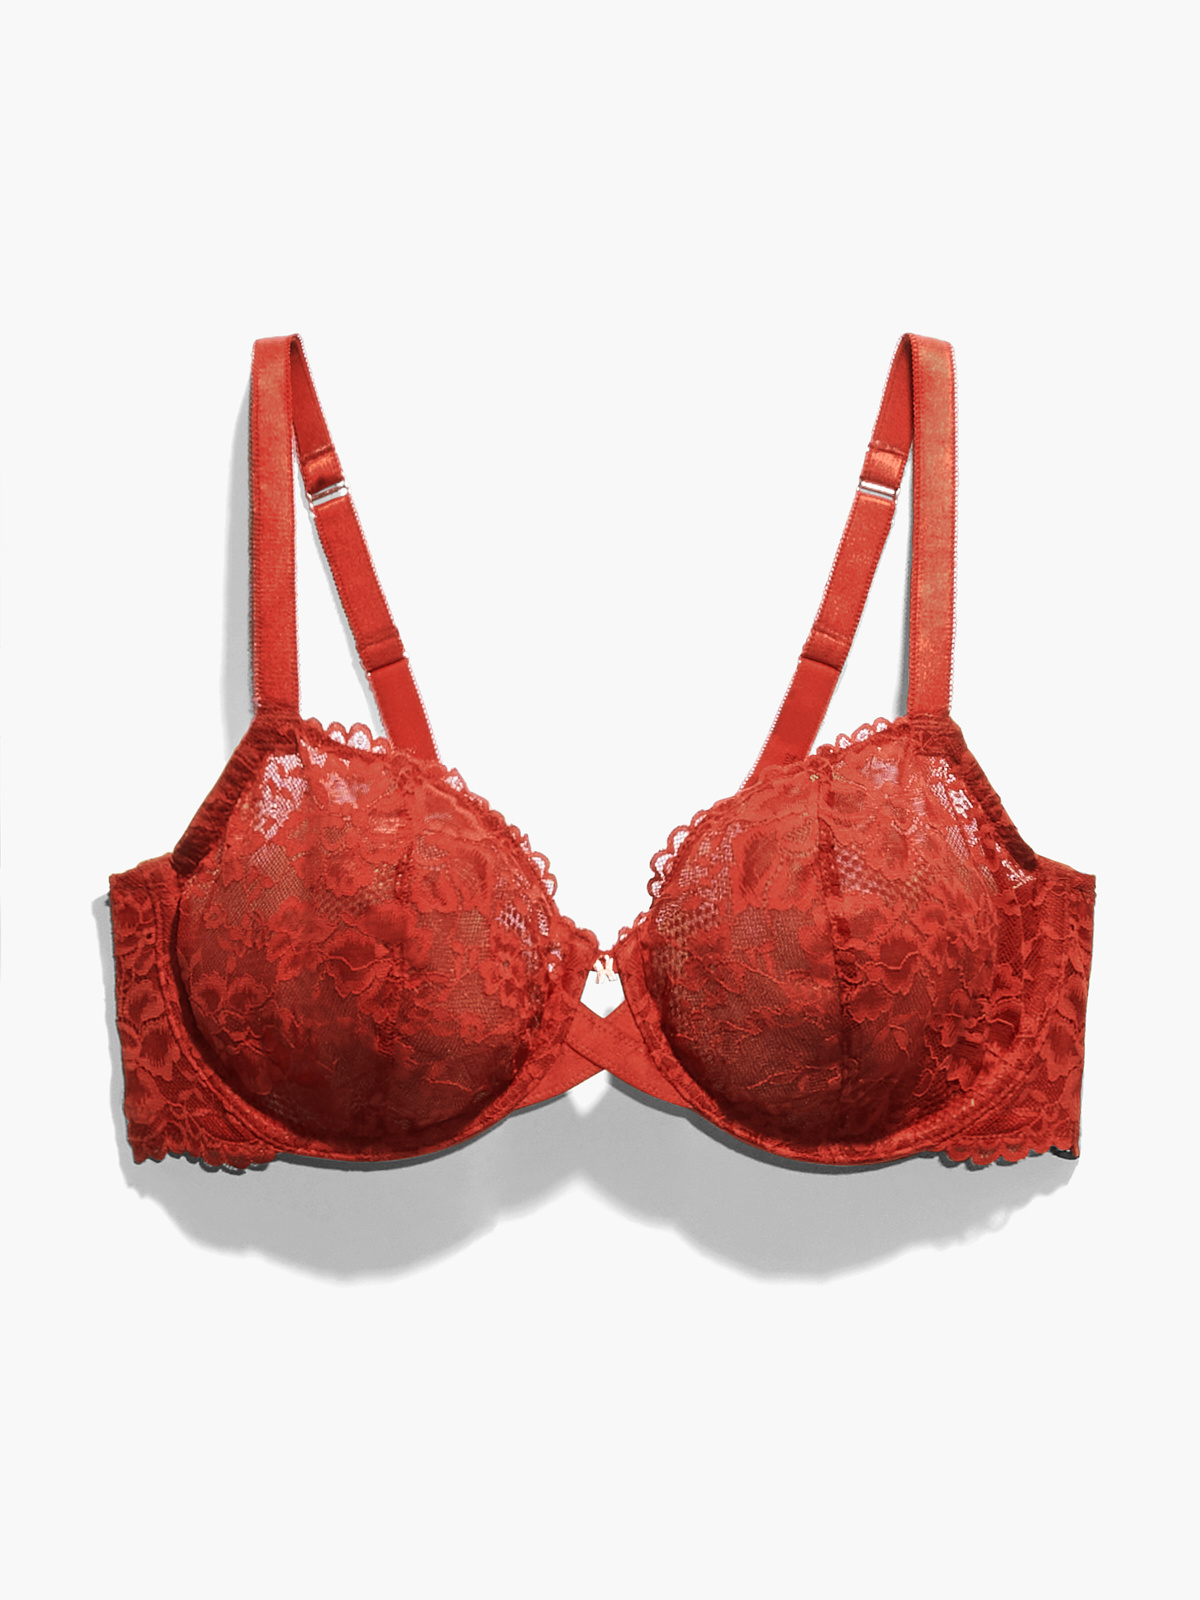  MELENECA Women's Full Coverage No Padding Plus Size Lace Underwire  Bra Cabernet Red 34B : Clothing, Shoes & Jewelry